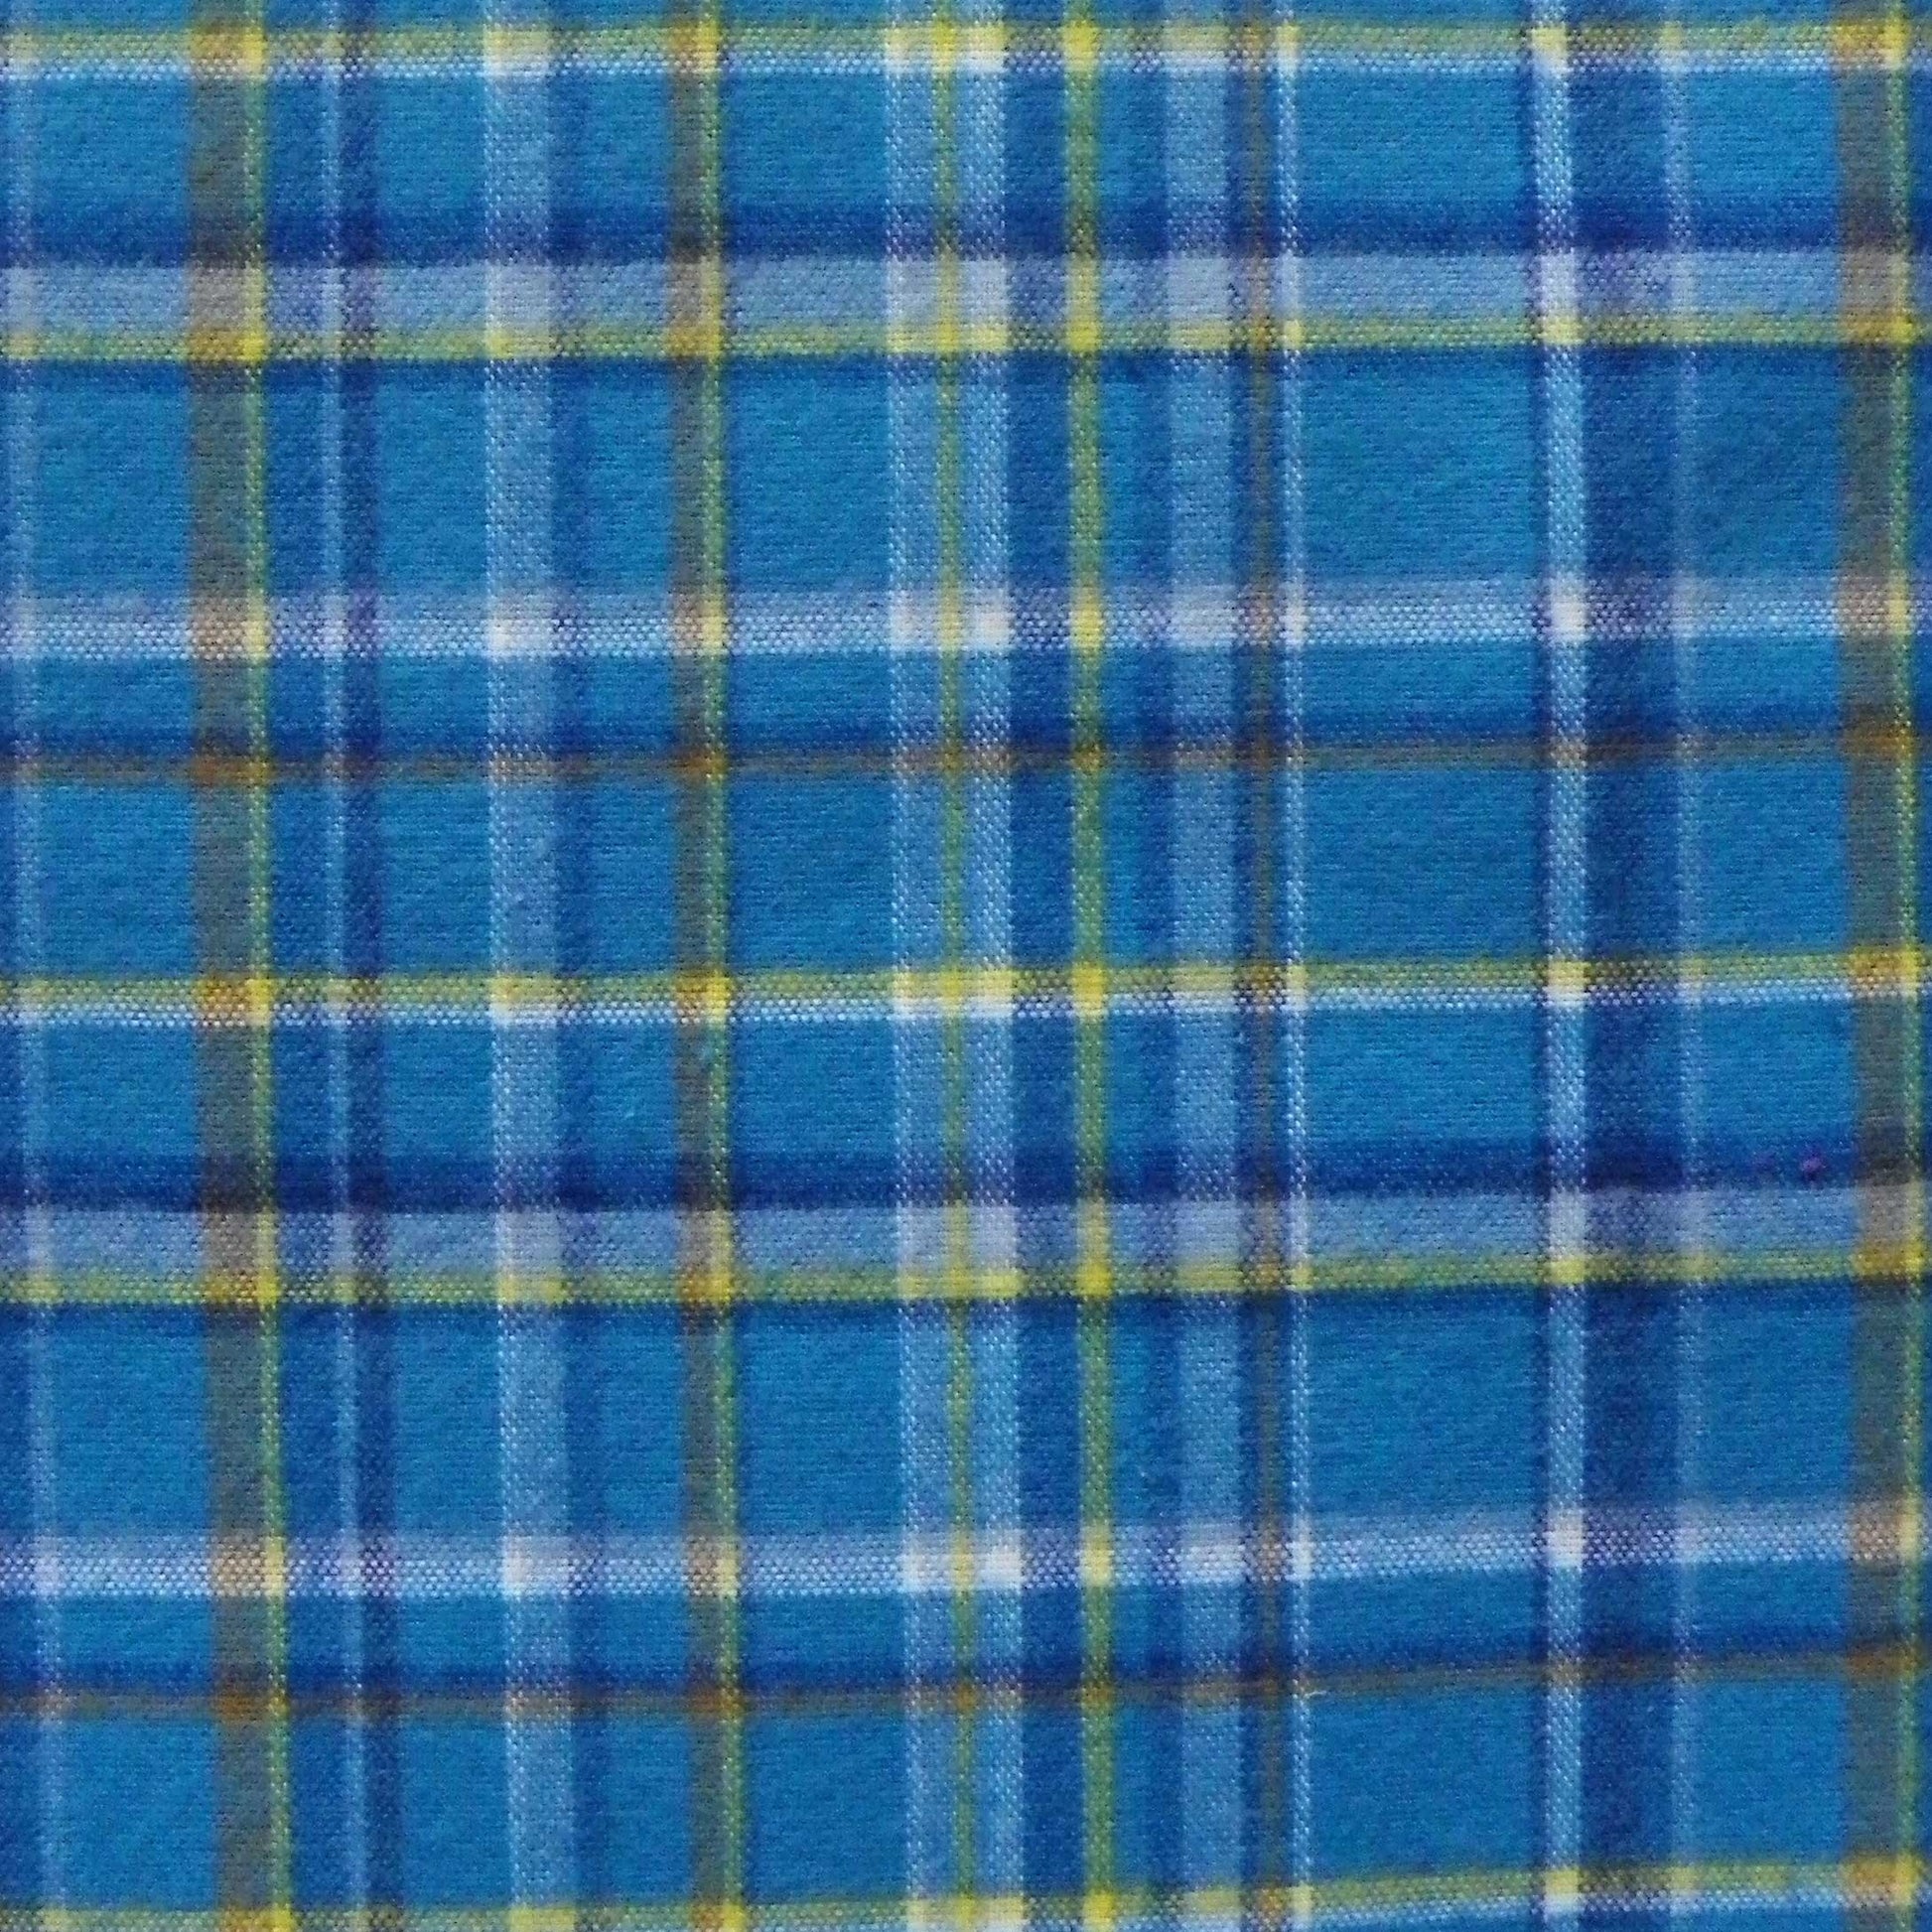 Green Mountain Flannel swatch - Sky blue, dark blue, yellow and white 